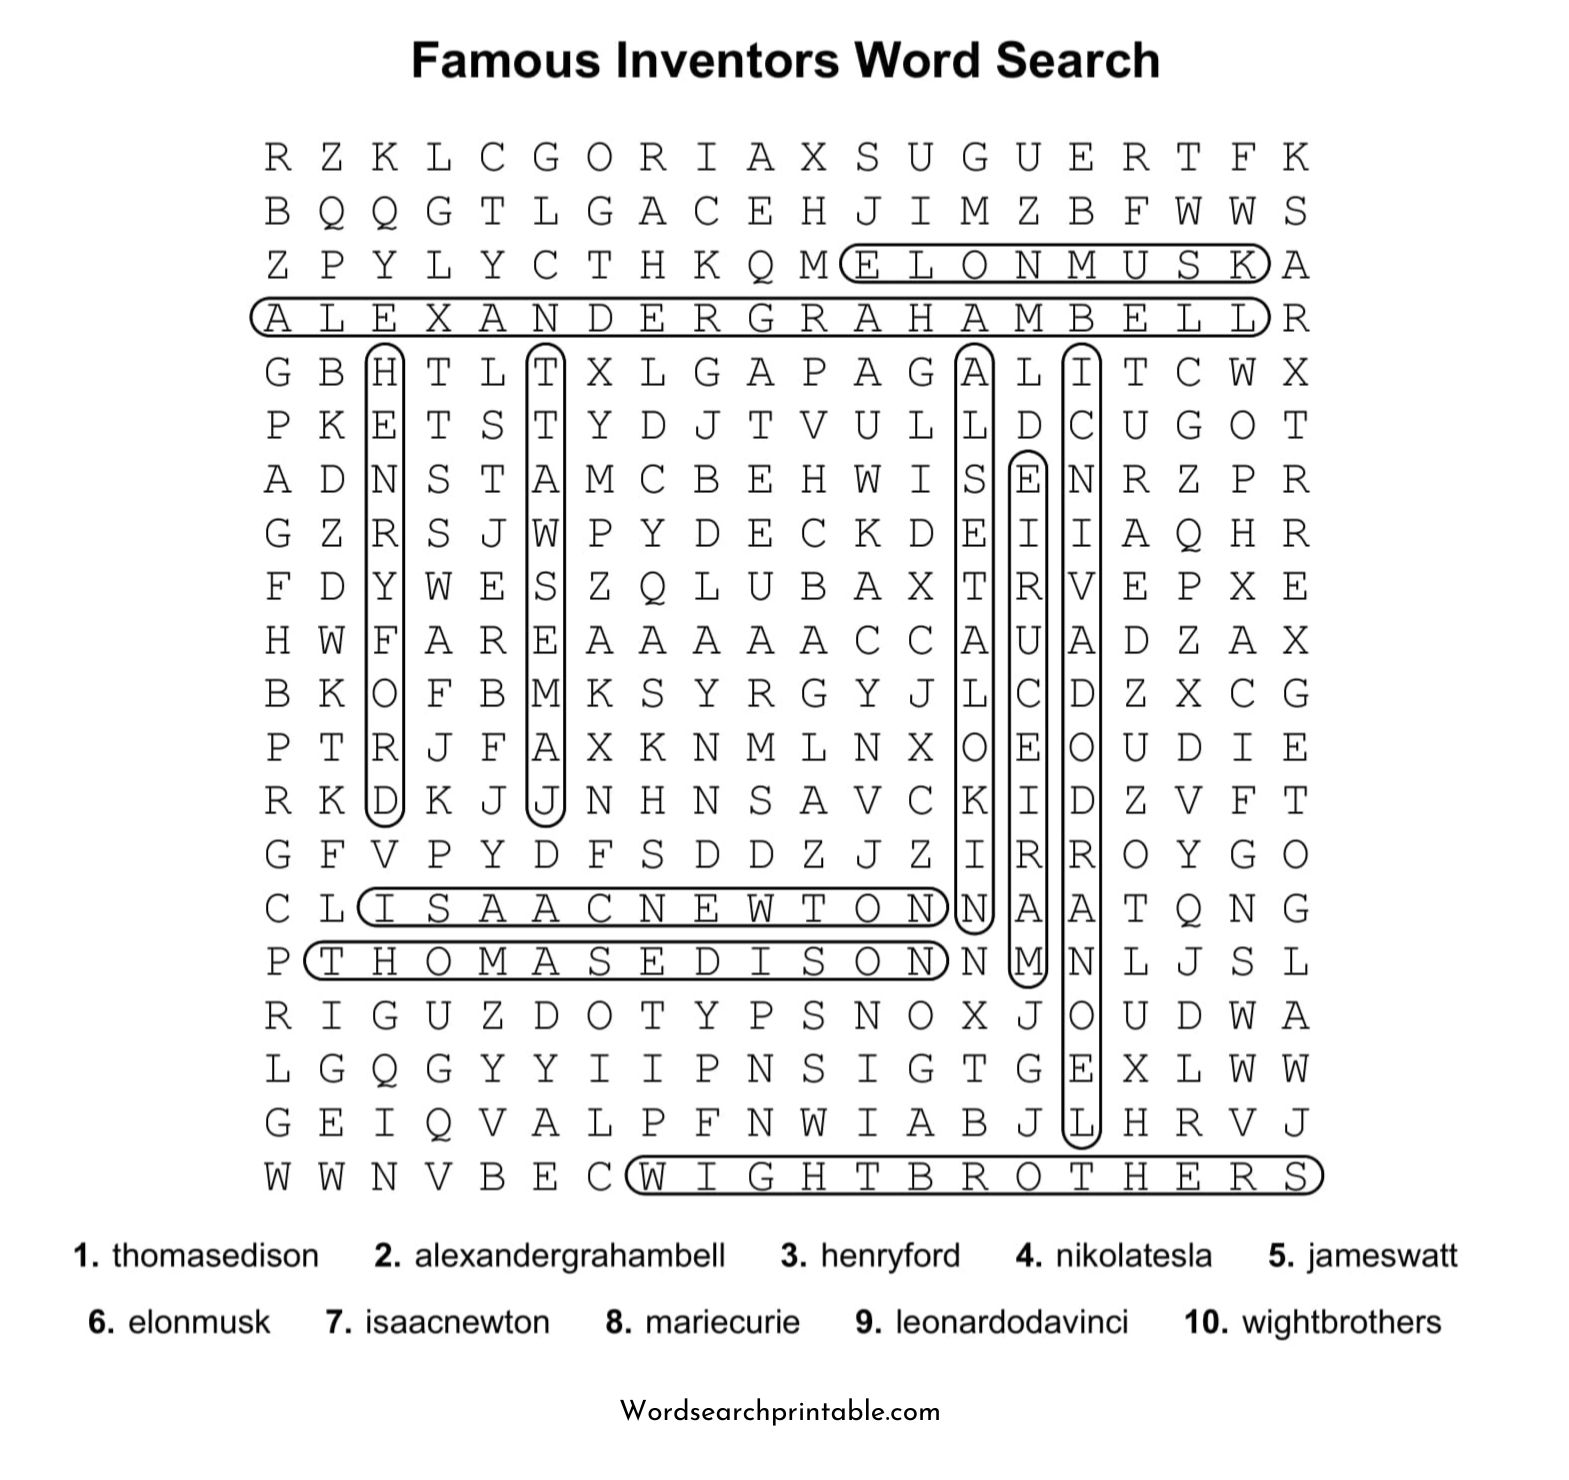 famous inventors word search puzzle solution